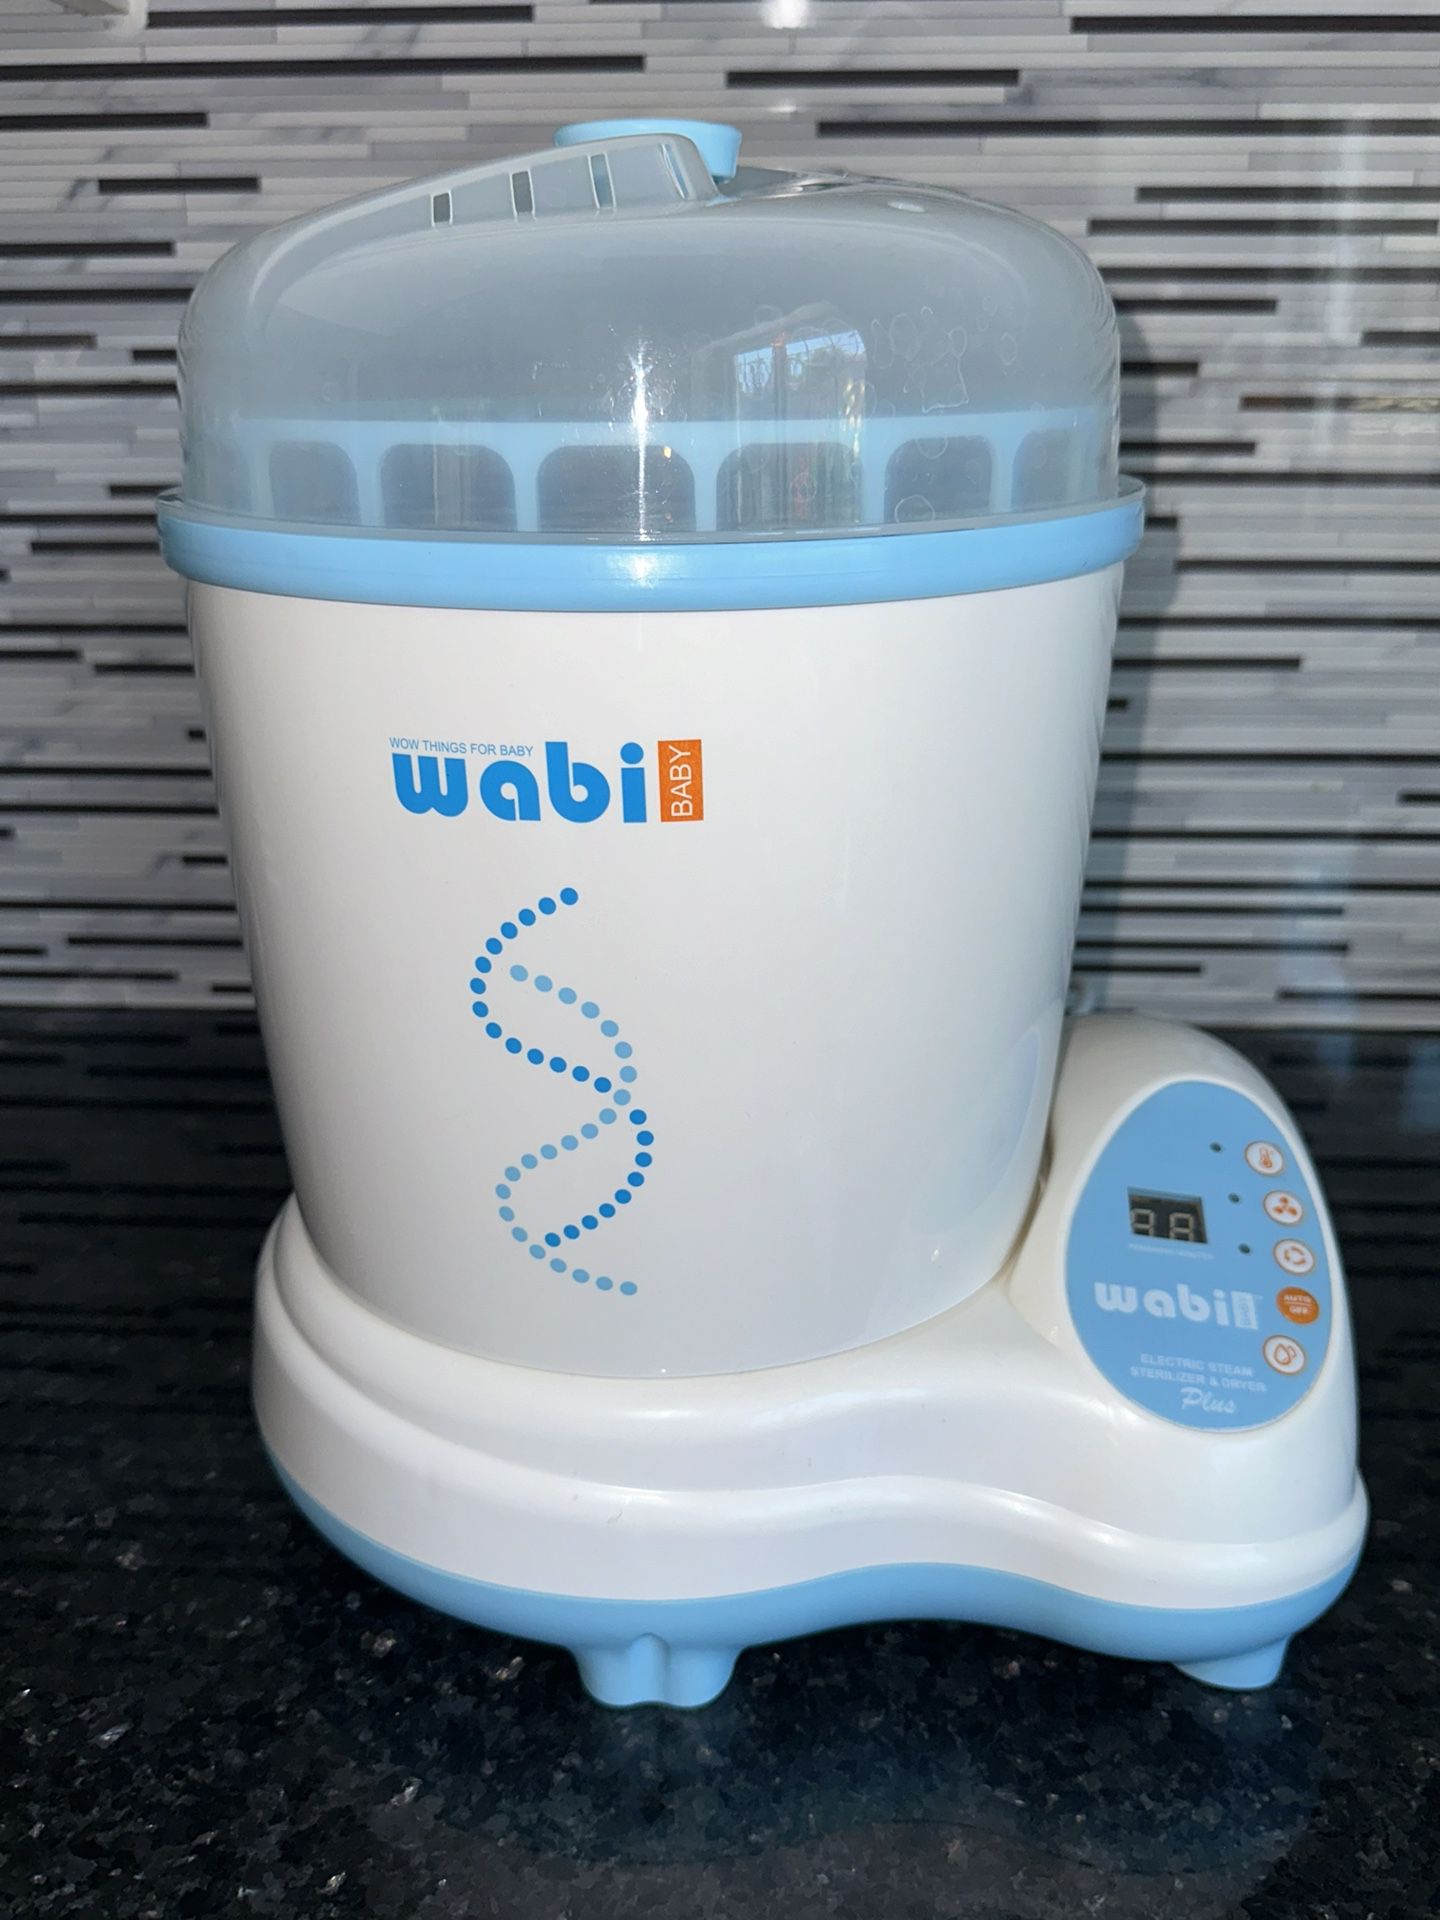 Wabi Baby Electric 3-in-1 Steam Sterilizer and Dryer